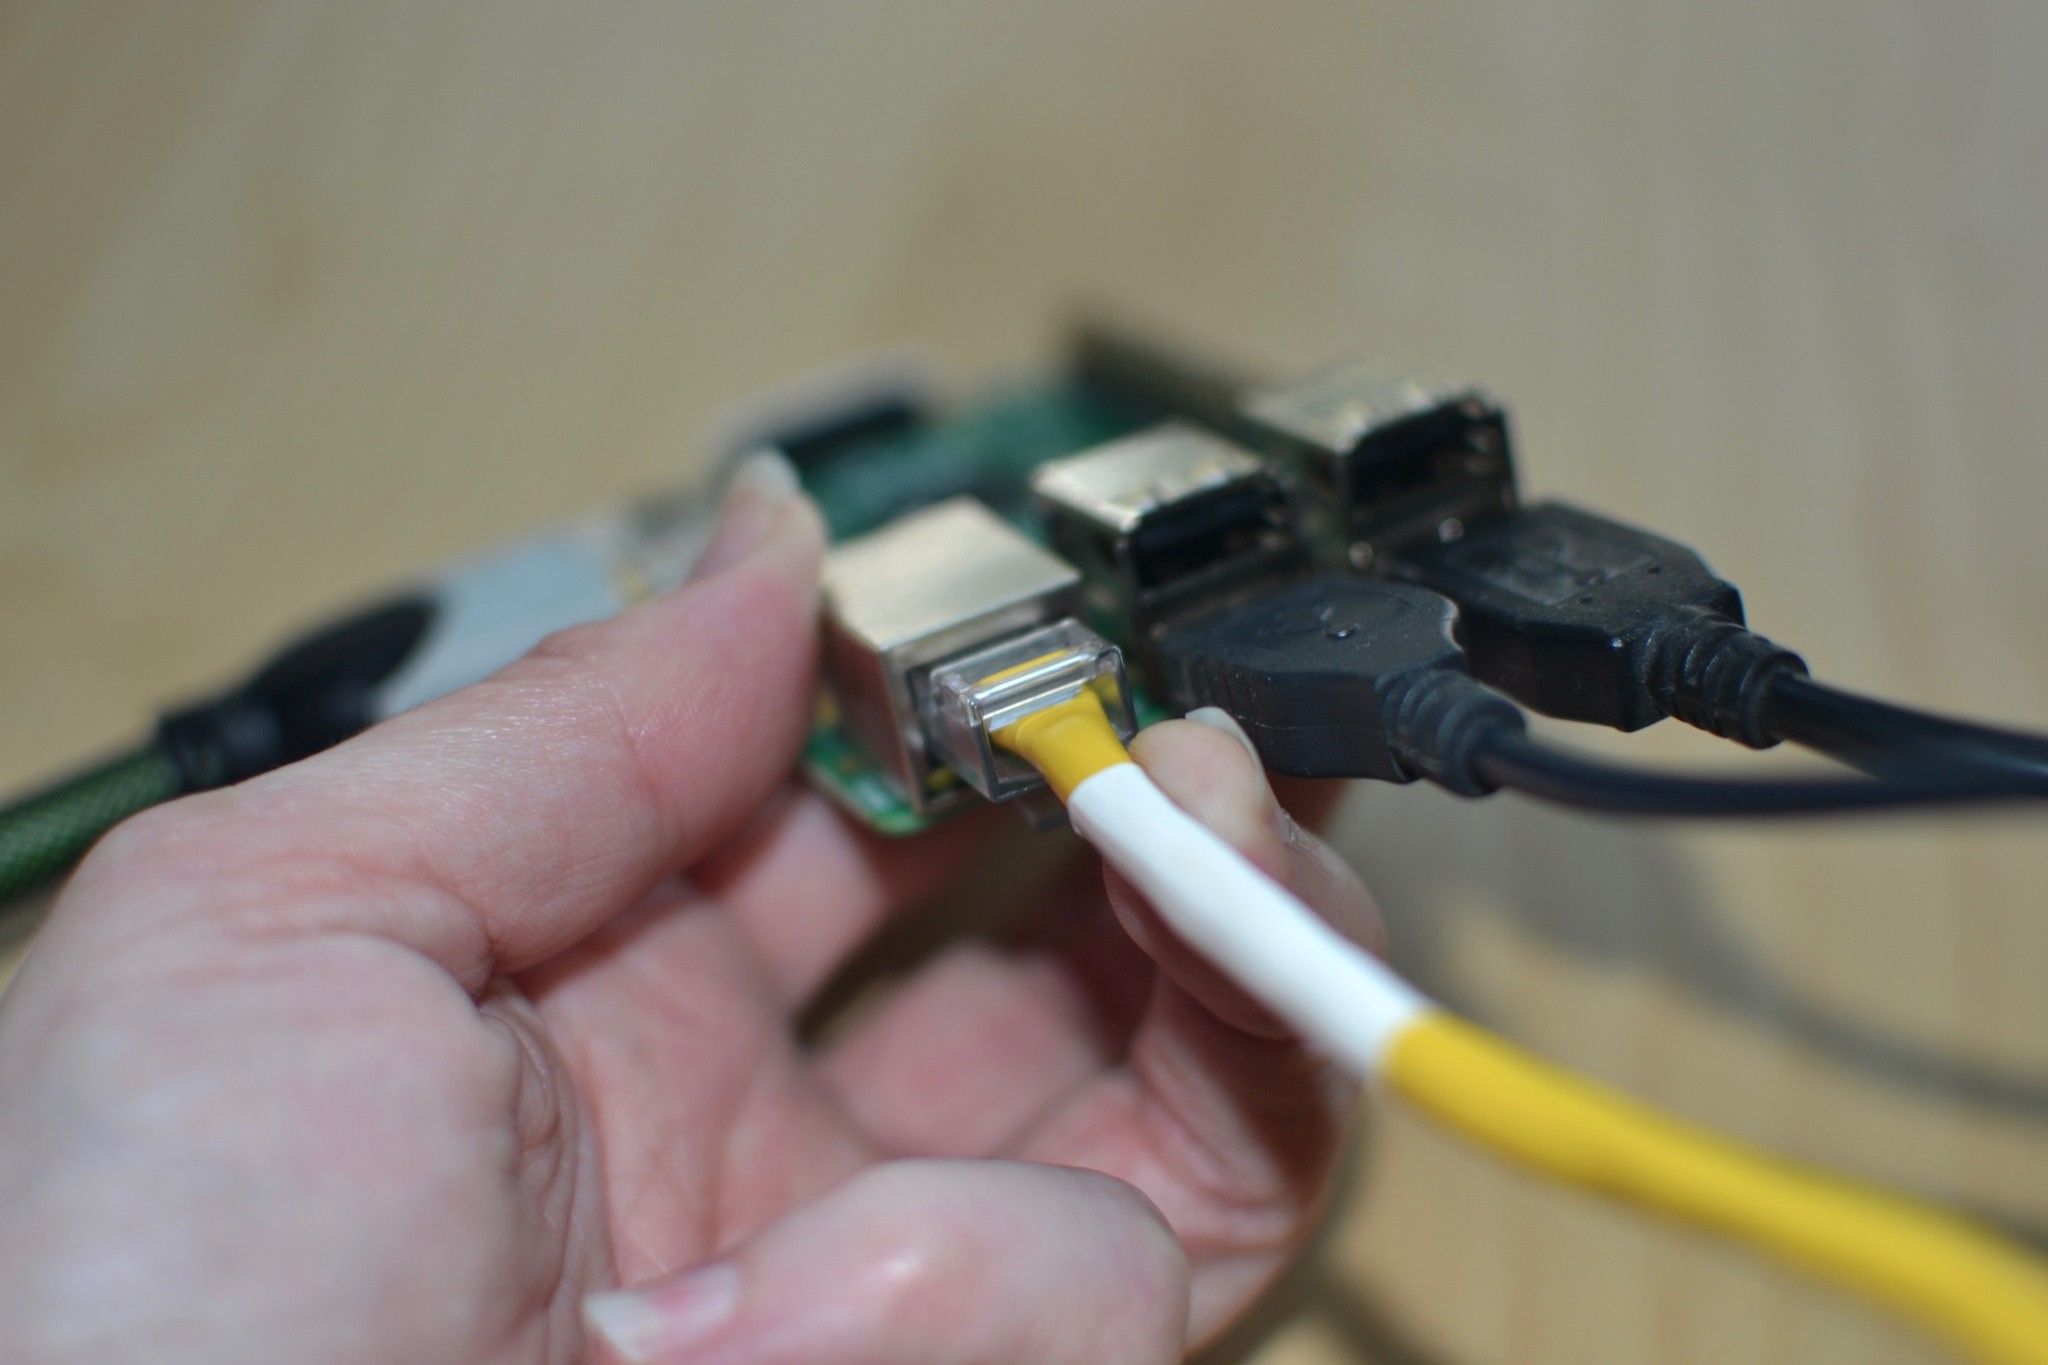 Connecting ethernet cable to Raspberry Pi